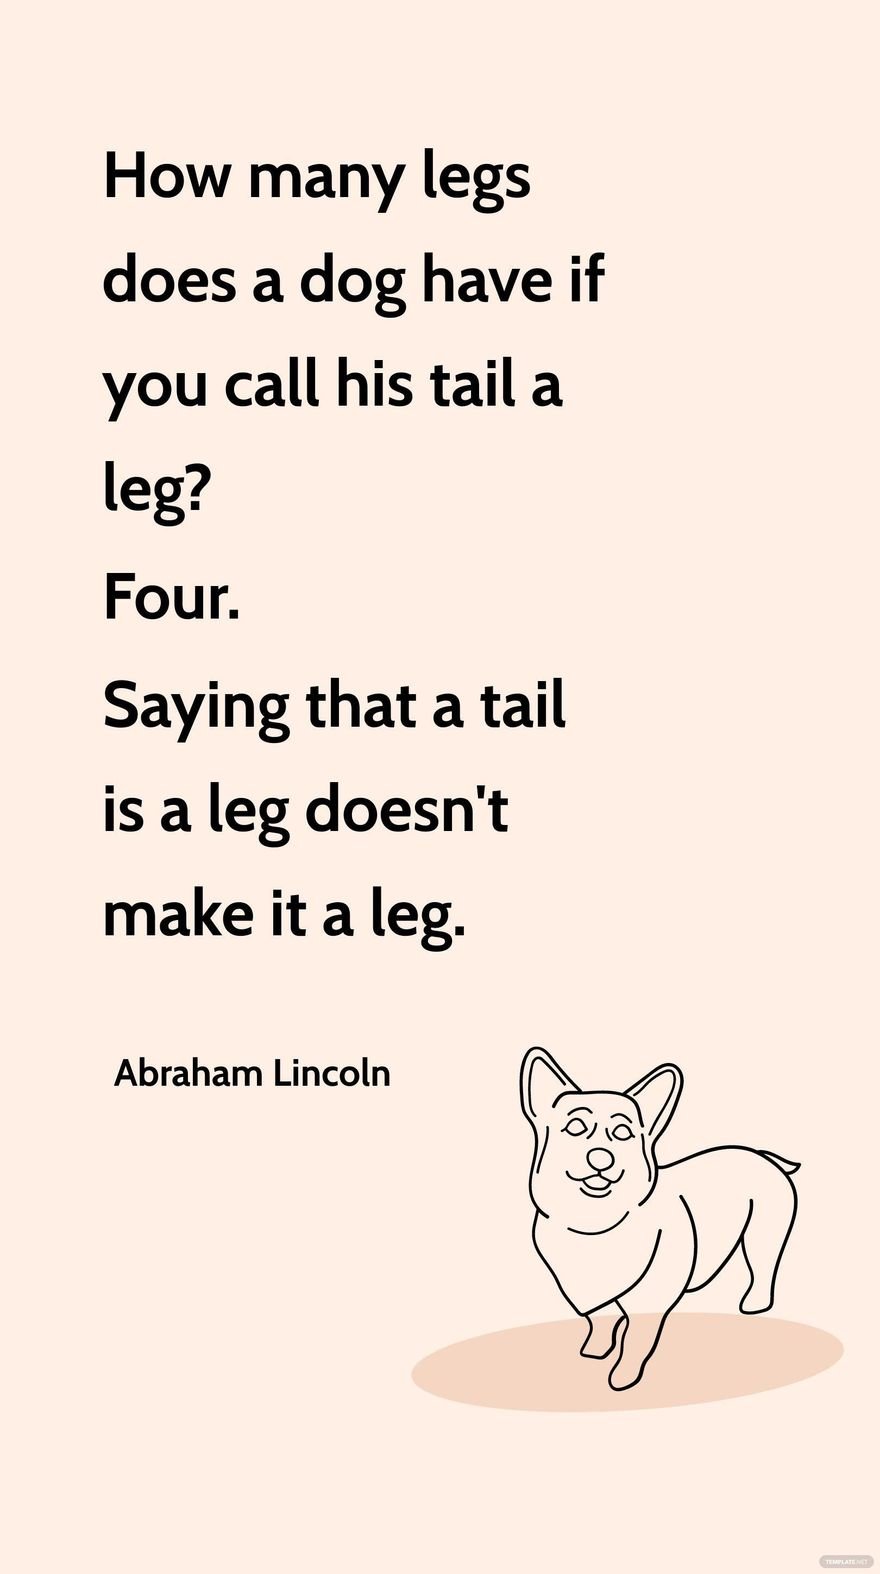 Abraham Lincoln - How many legs does a dog have if you call his tail a leg? Four. Saying that a tail is a leg doesn't make it a leg.